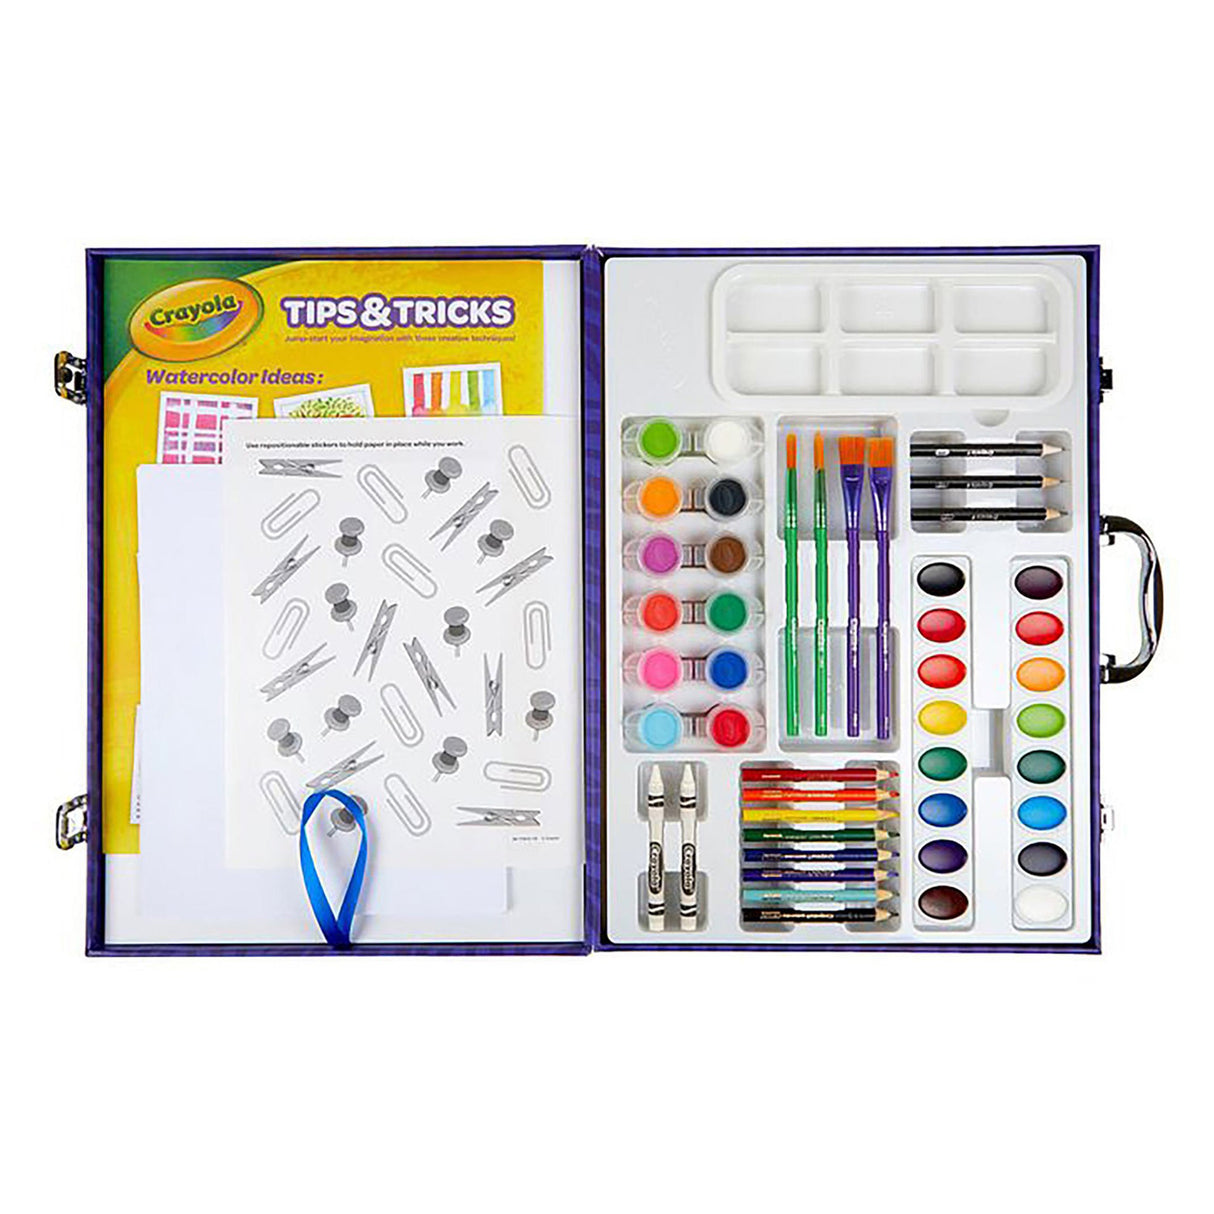 Crayola Paint and Create Easel Art Paint Set